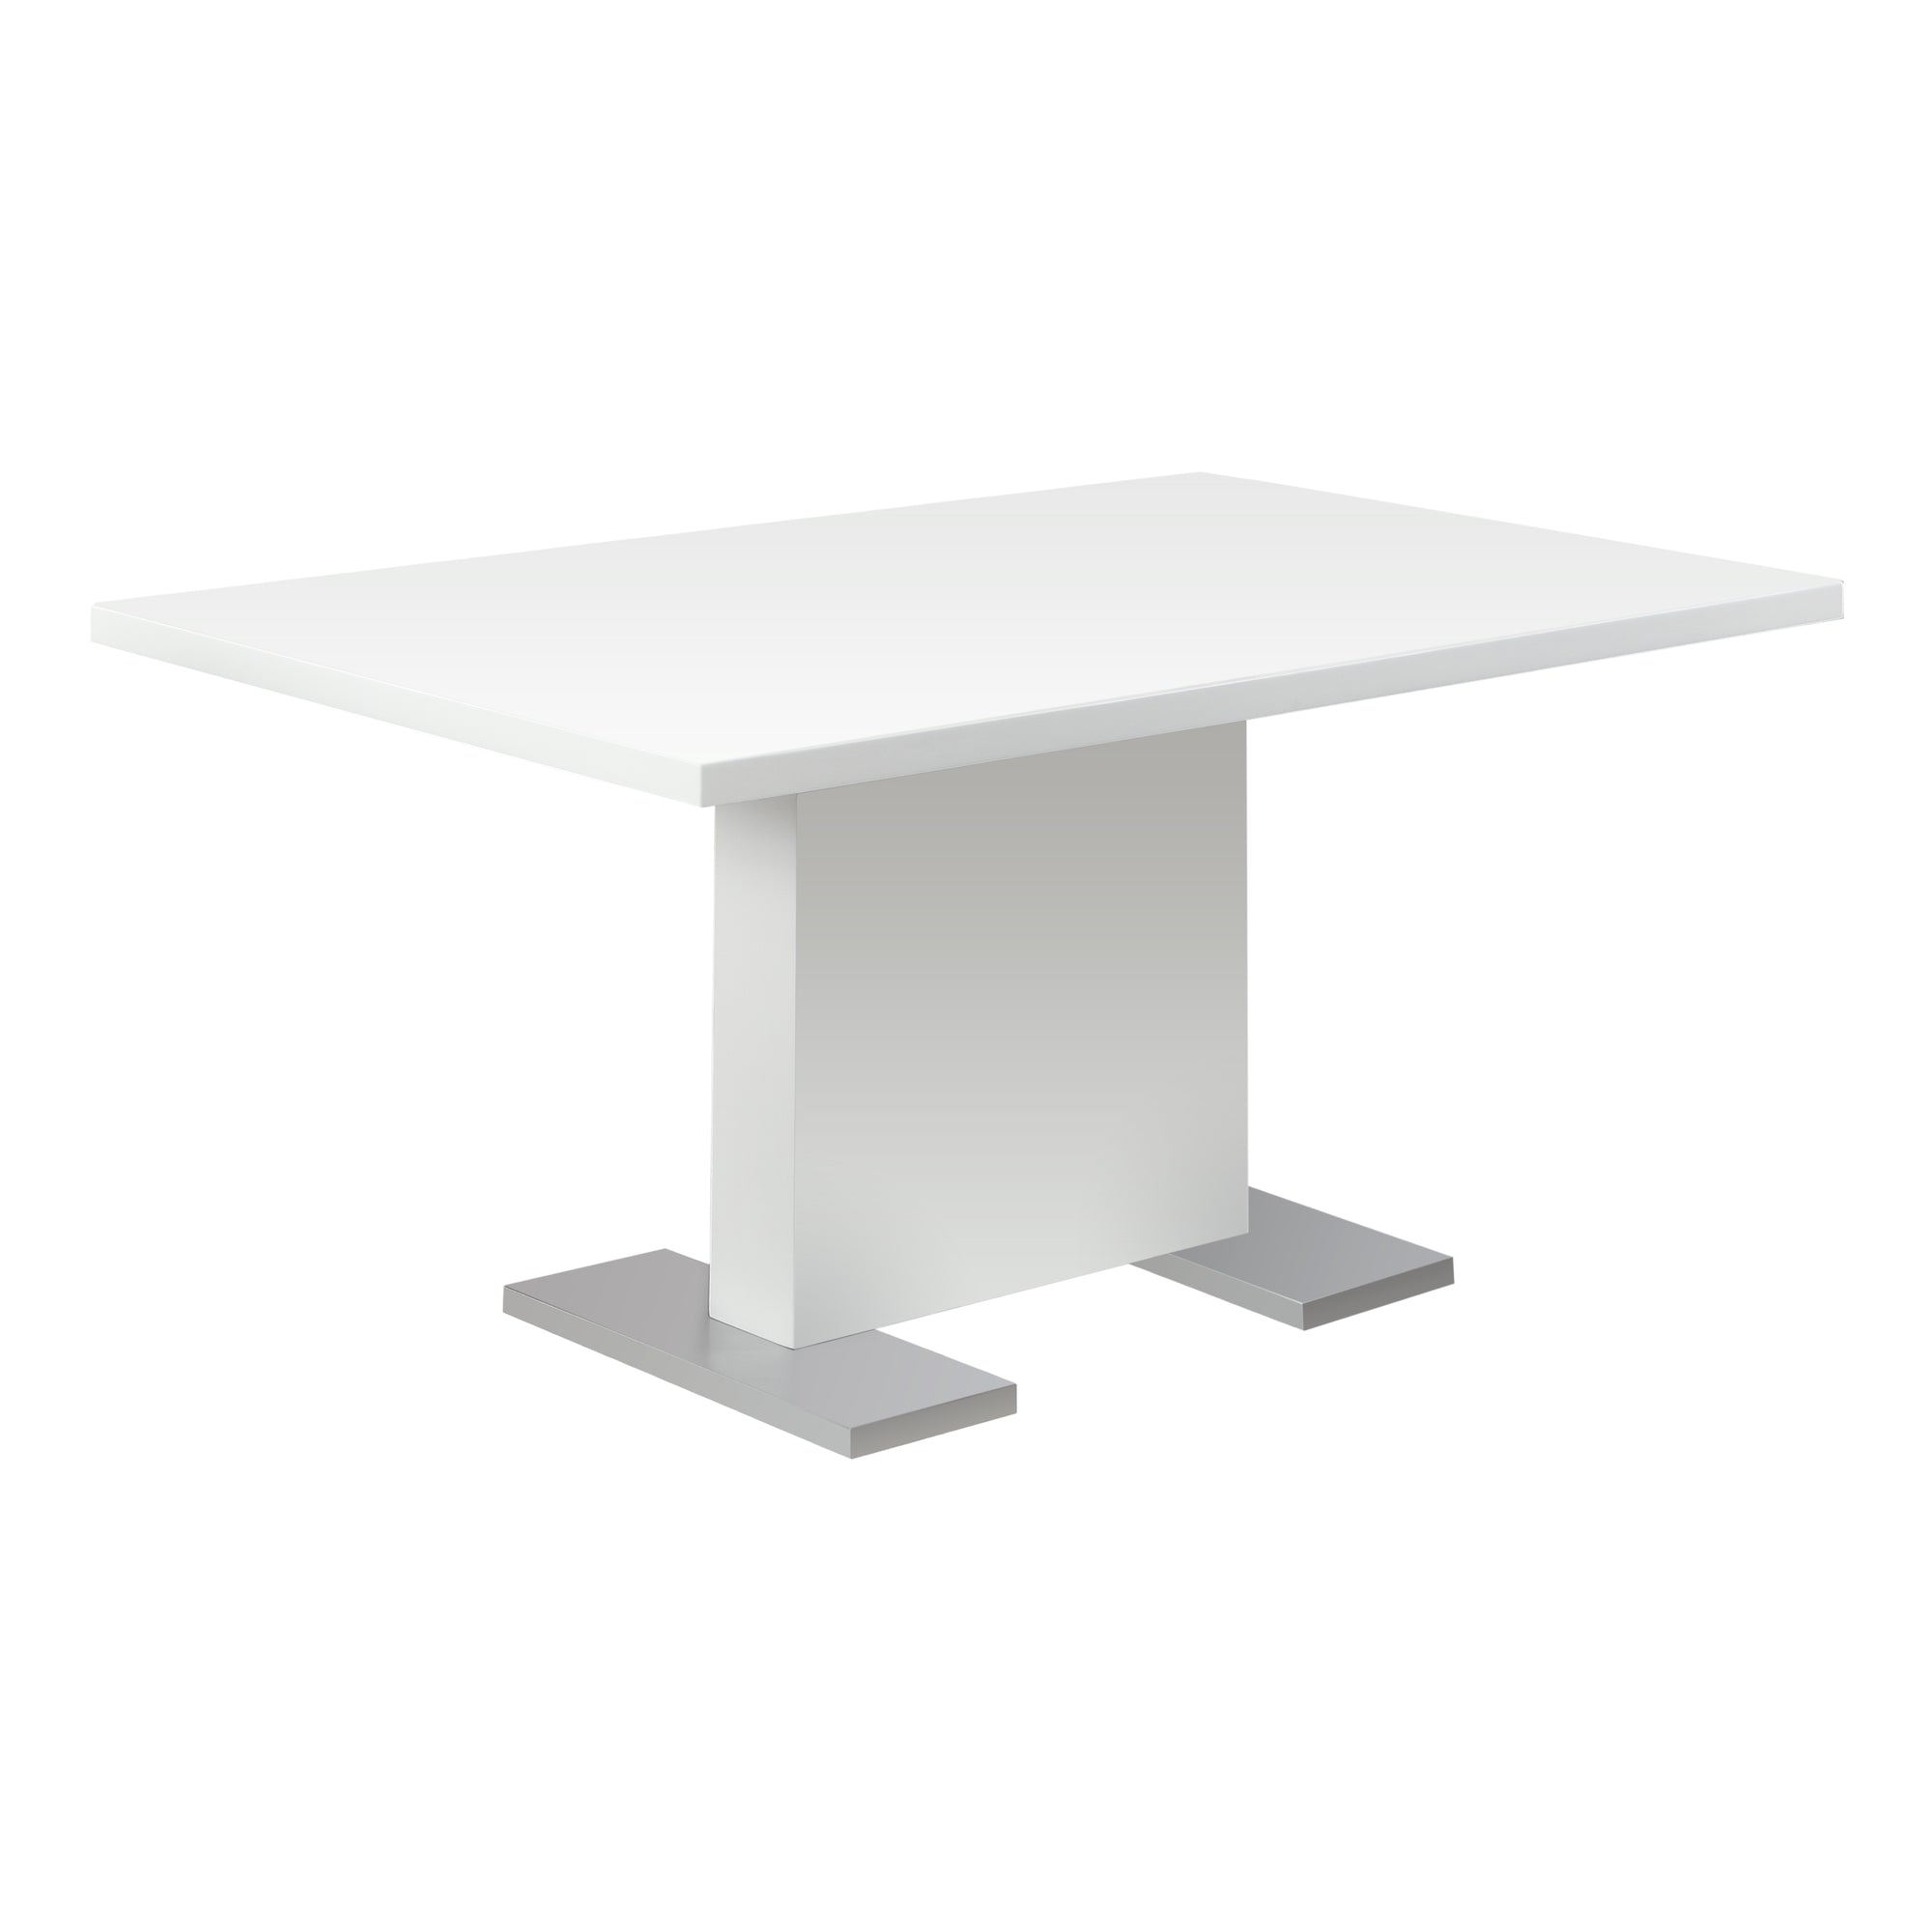 MN-461090    Dining Table, 60" Rectangular, Metal, Kitchen, Dining Room, Metal Base, Laminate, Glossy White, Chrome, Contemporary, Modern